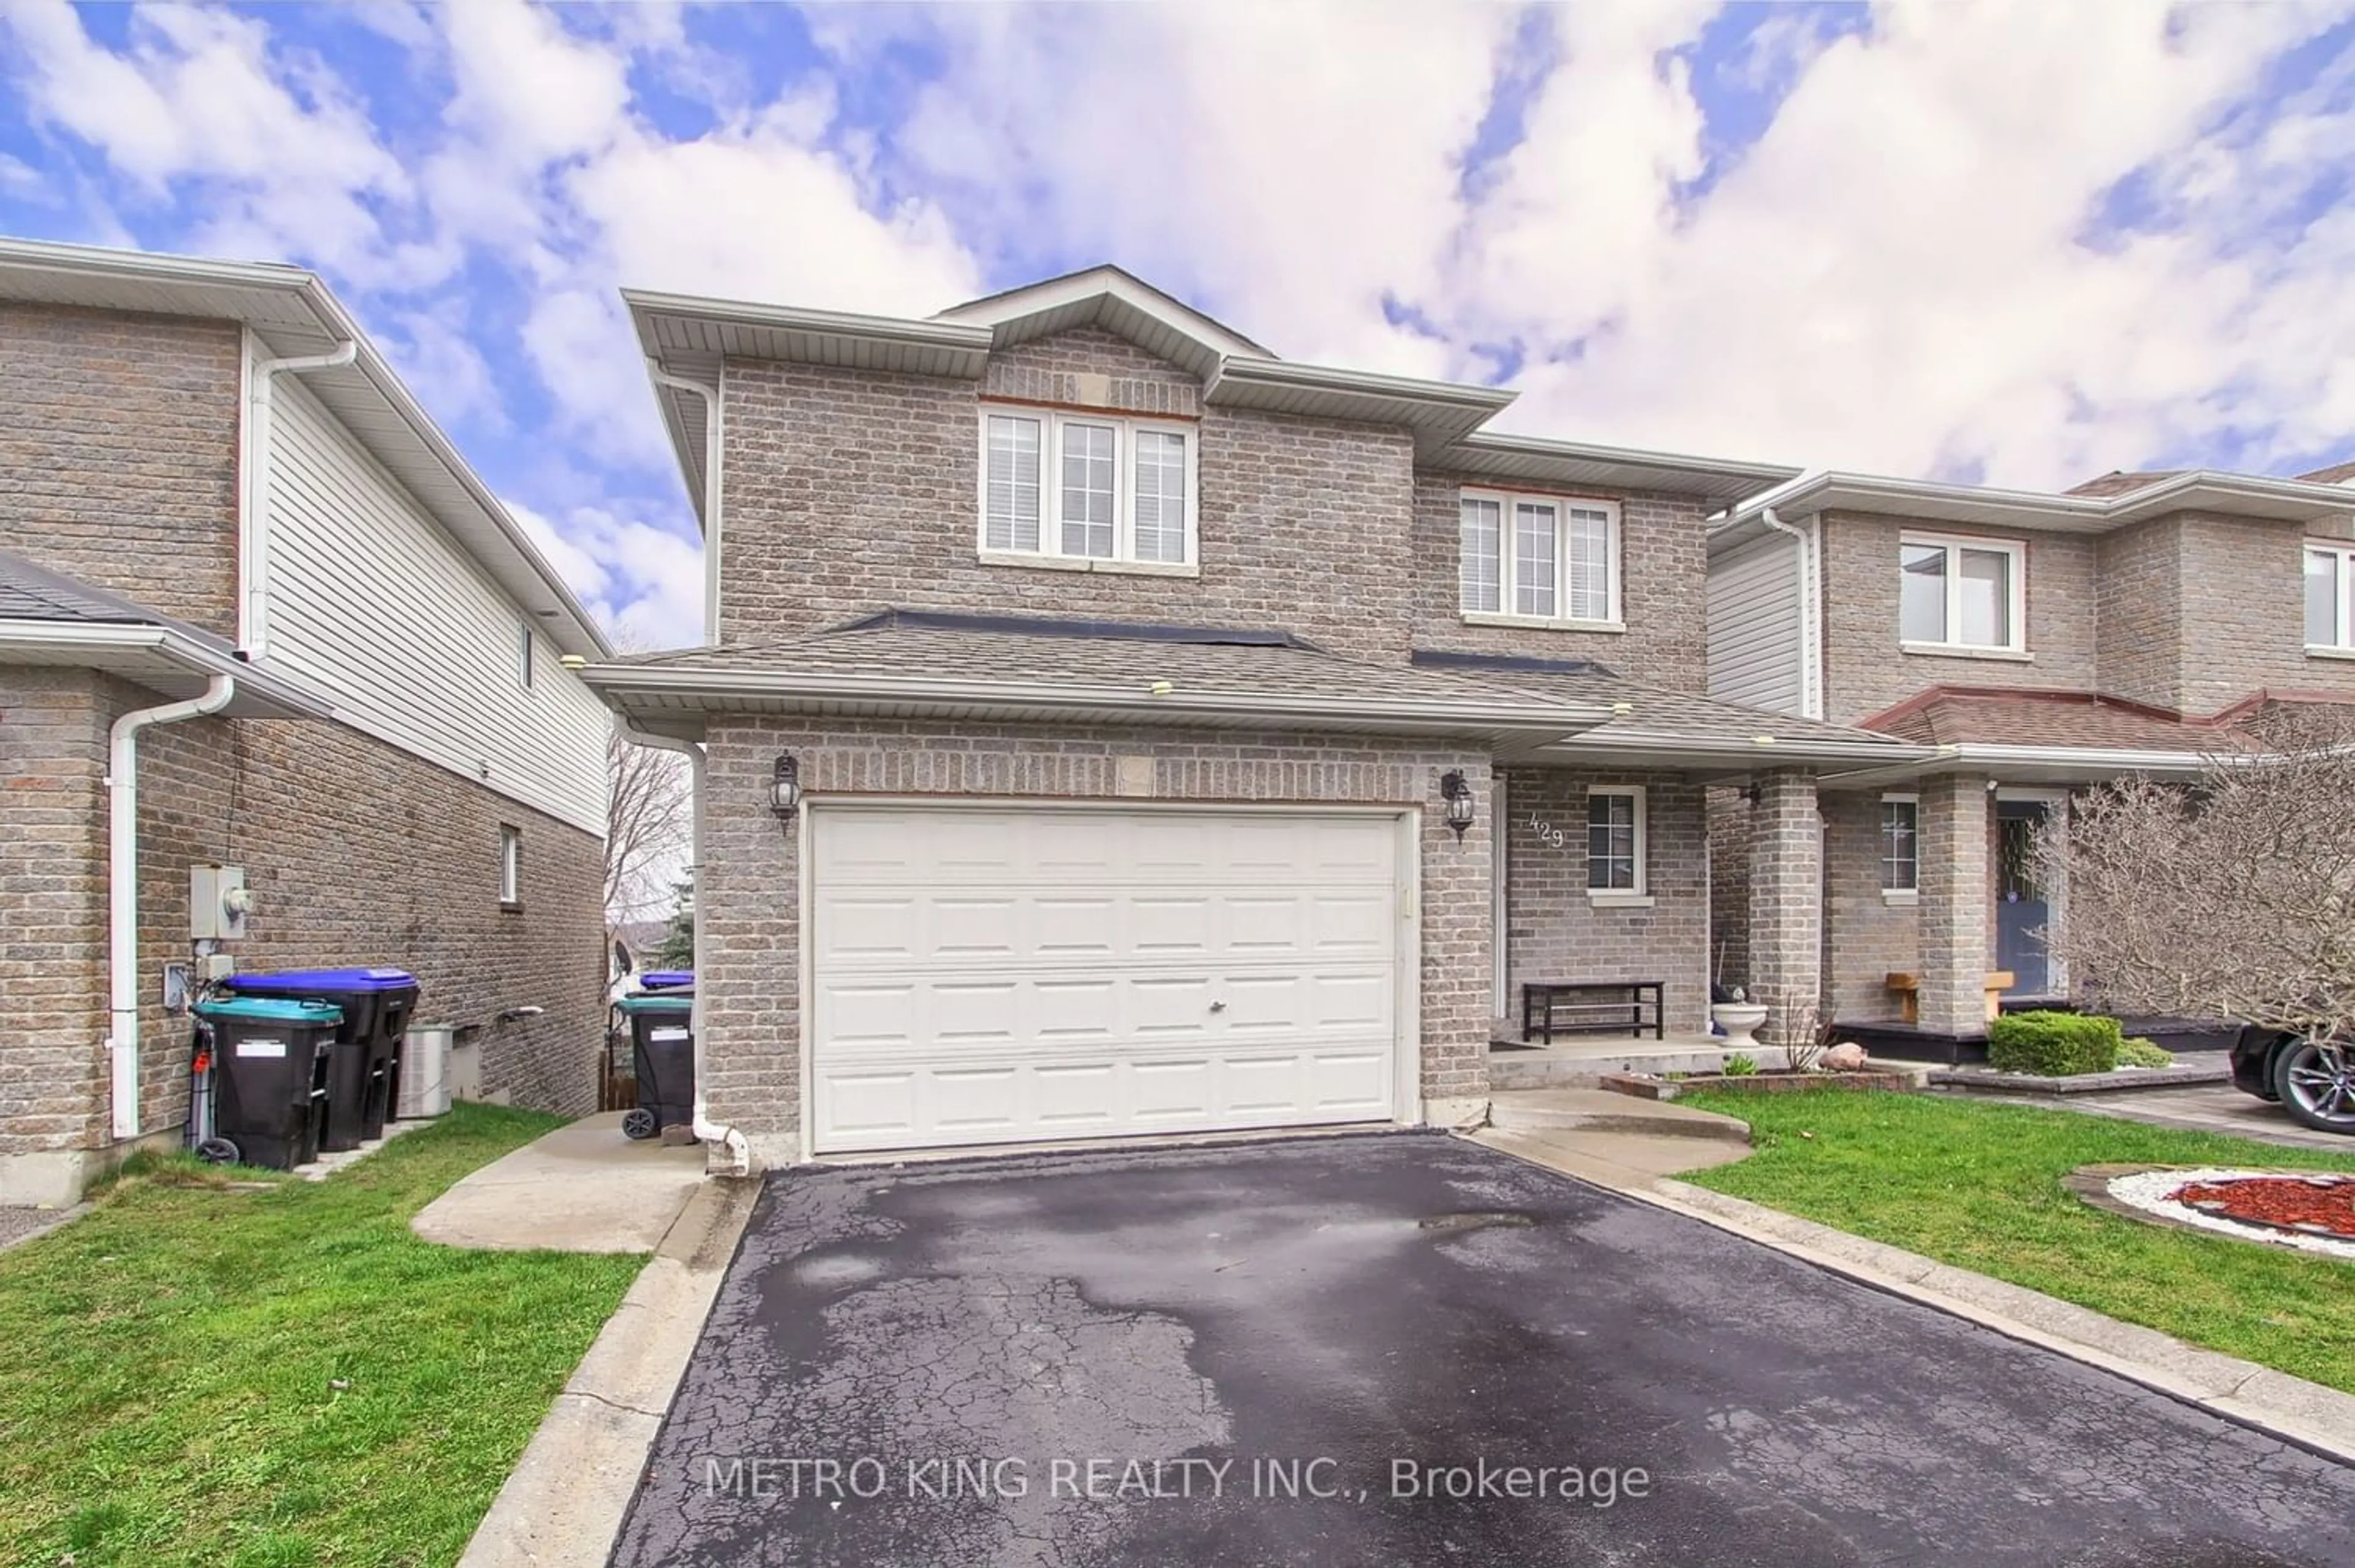 Frontside or backside of a home for 429 Simcoe Rd, Bradford West Gwillimbury Ontario L3Z 3C4